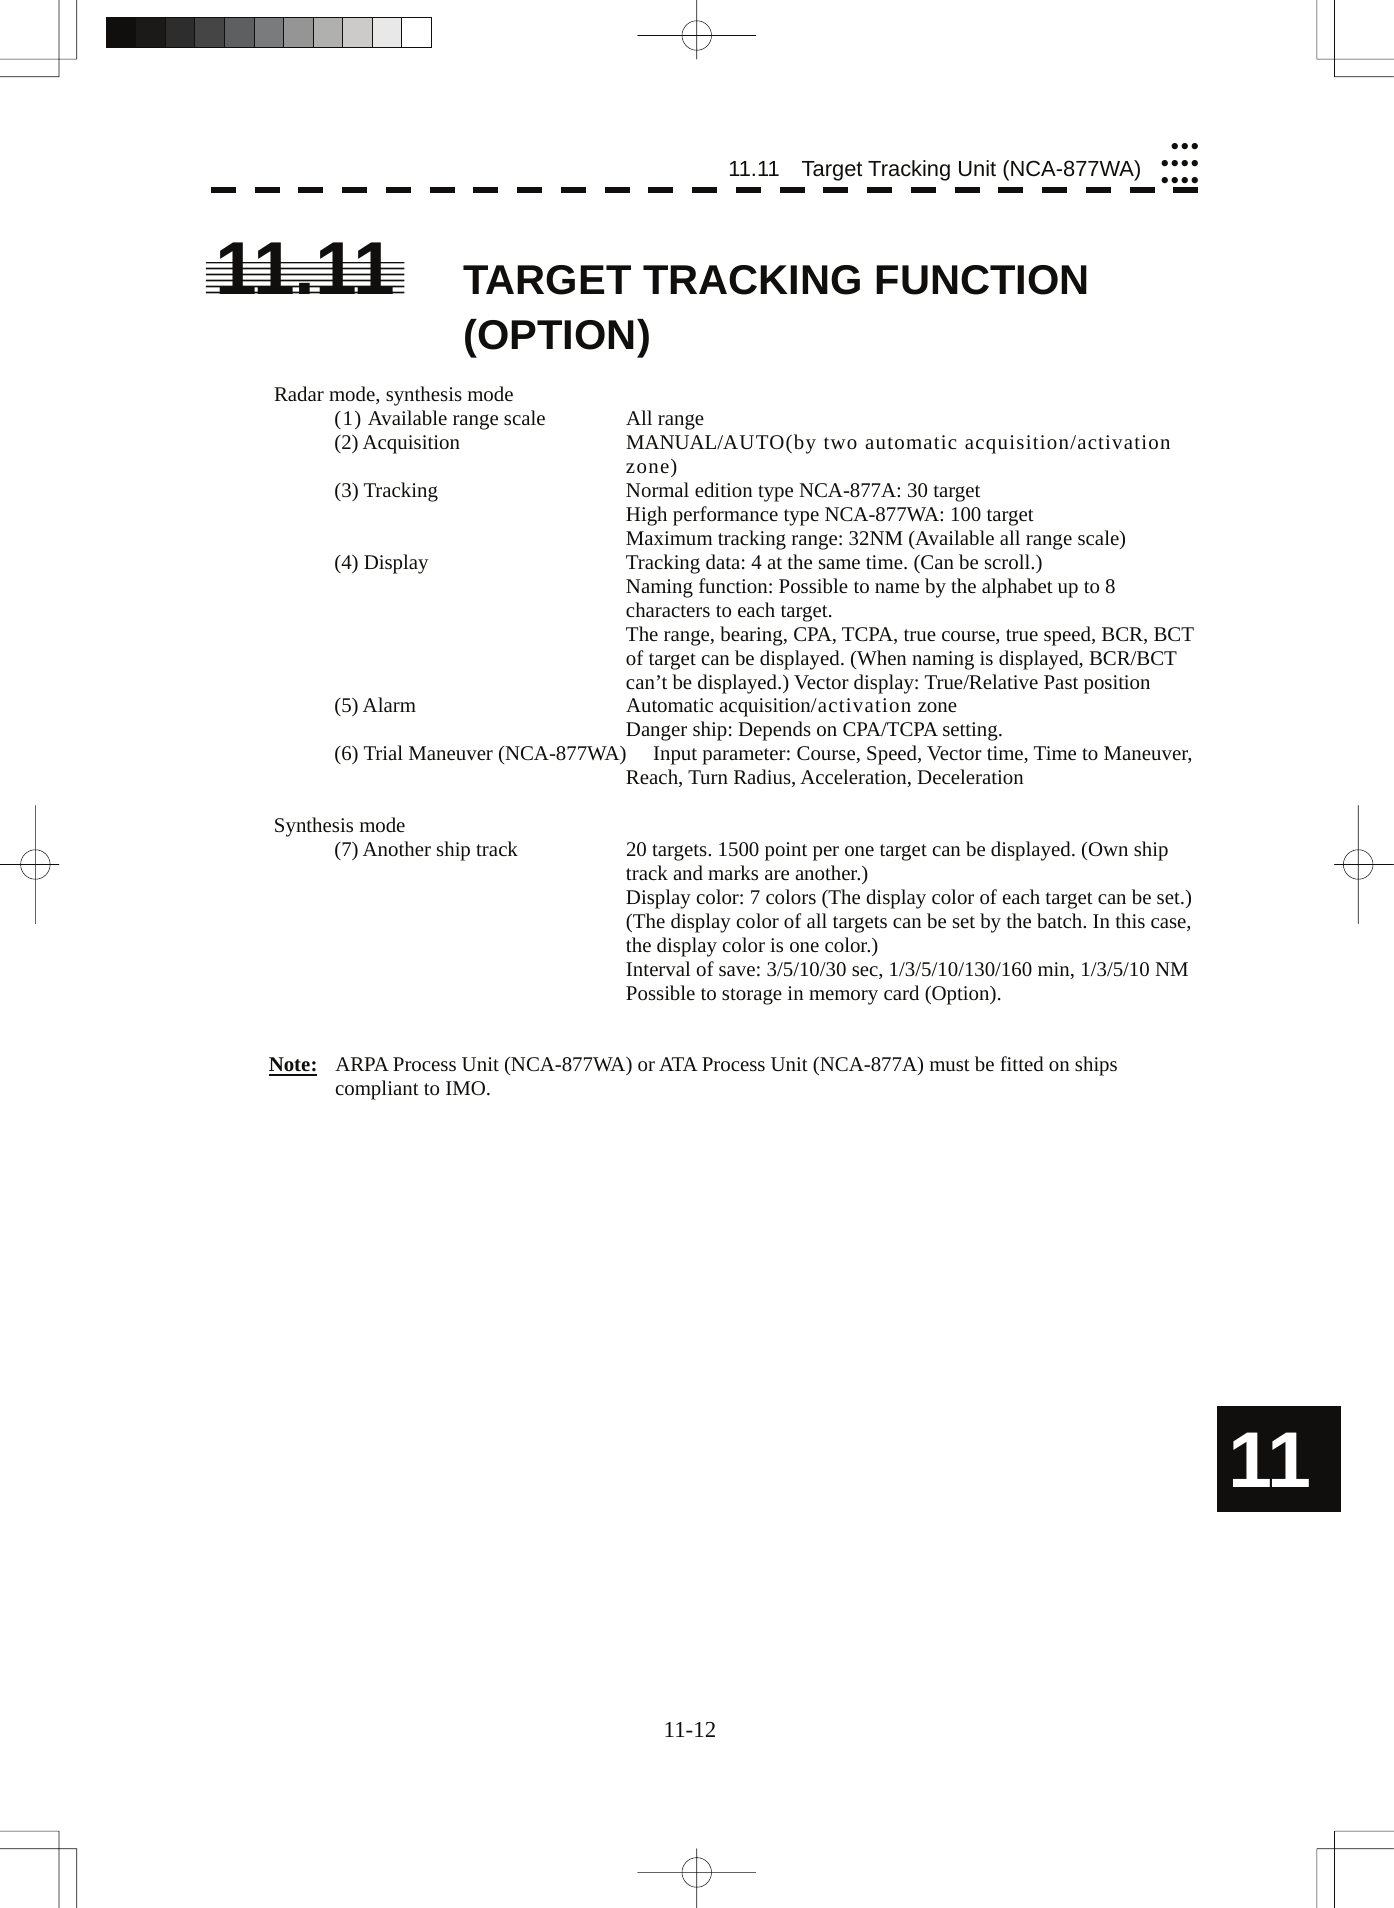  11.11  Target Tracking Unit (NCA-877WA)yyyyyyyyyyy11.11  TARGET TRACKING FUNCTION (OPTION)  Radar mode, synthesis mode (1) Available range scale  All range (2) Acquisition  MANUAL/AUTO(by two automatic acquisition/activation zone) (3) Tracking  Normal edition type NCA-877A: 30 target   High performance type NCA-877WA: 100 target   Maximum tracking range: 32NM (Available all range scale) (4) Display  Tracking data: 4 at the same time. (Can be scroll.)   Naming function: Possible to name by the alphabet up to 8 characters to each target.   The range, bearing, CPA, TCPA, true course, true speed, BCR, BCT of target can be displayed. (When naming is displayed, BCR/BCT can’t be displayed.) Vector display: True/Relative Past position (5) Alarm  Automatic acquisition/activation zone   Danger ship: Depends on CPA/TCPA setting. (6) Trial Maneuver (NCA-877WA)  Input parameter: Course, Speed, Vector time, Time to Maneuver, Reach, Turn Radius, Acceleration, Deceleration  Synthesis mode (7) Another ship track  20 targets. 1500 point per one target can be displayed. (Own ship track and marks are another.)   Display color: 7 colors (The display color of each target can be set.) (The display color of all targets can be set by the batch. In this case, the display color is one color.)   Interval of save: 3/5/10/30 sec, 1/3/5/10/130/160 min, 1/3/5/10 NM Possible to storage in memory card (Option).   Note:  ARPA Process Unit (NCA-877WA) or ATA Process Unit (NCA-877A) must be fitted on ships compliant to IMO.  11 11-12 